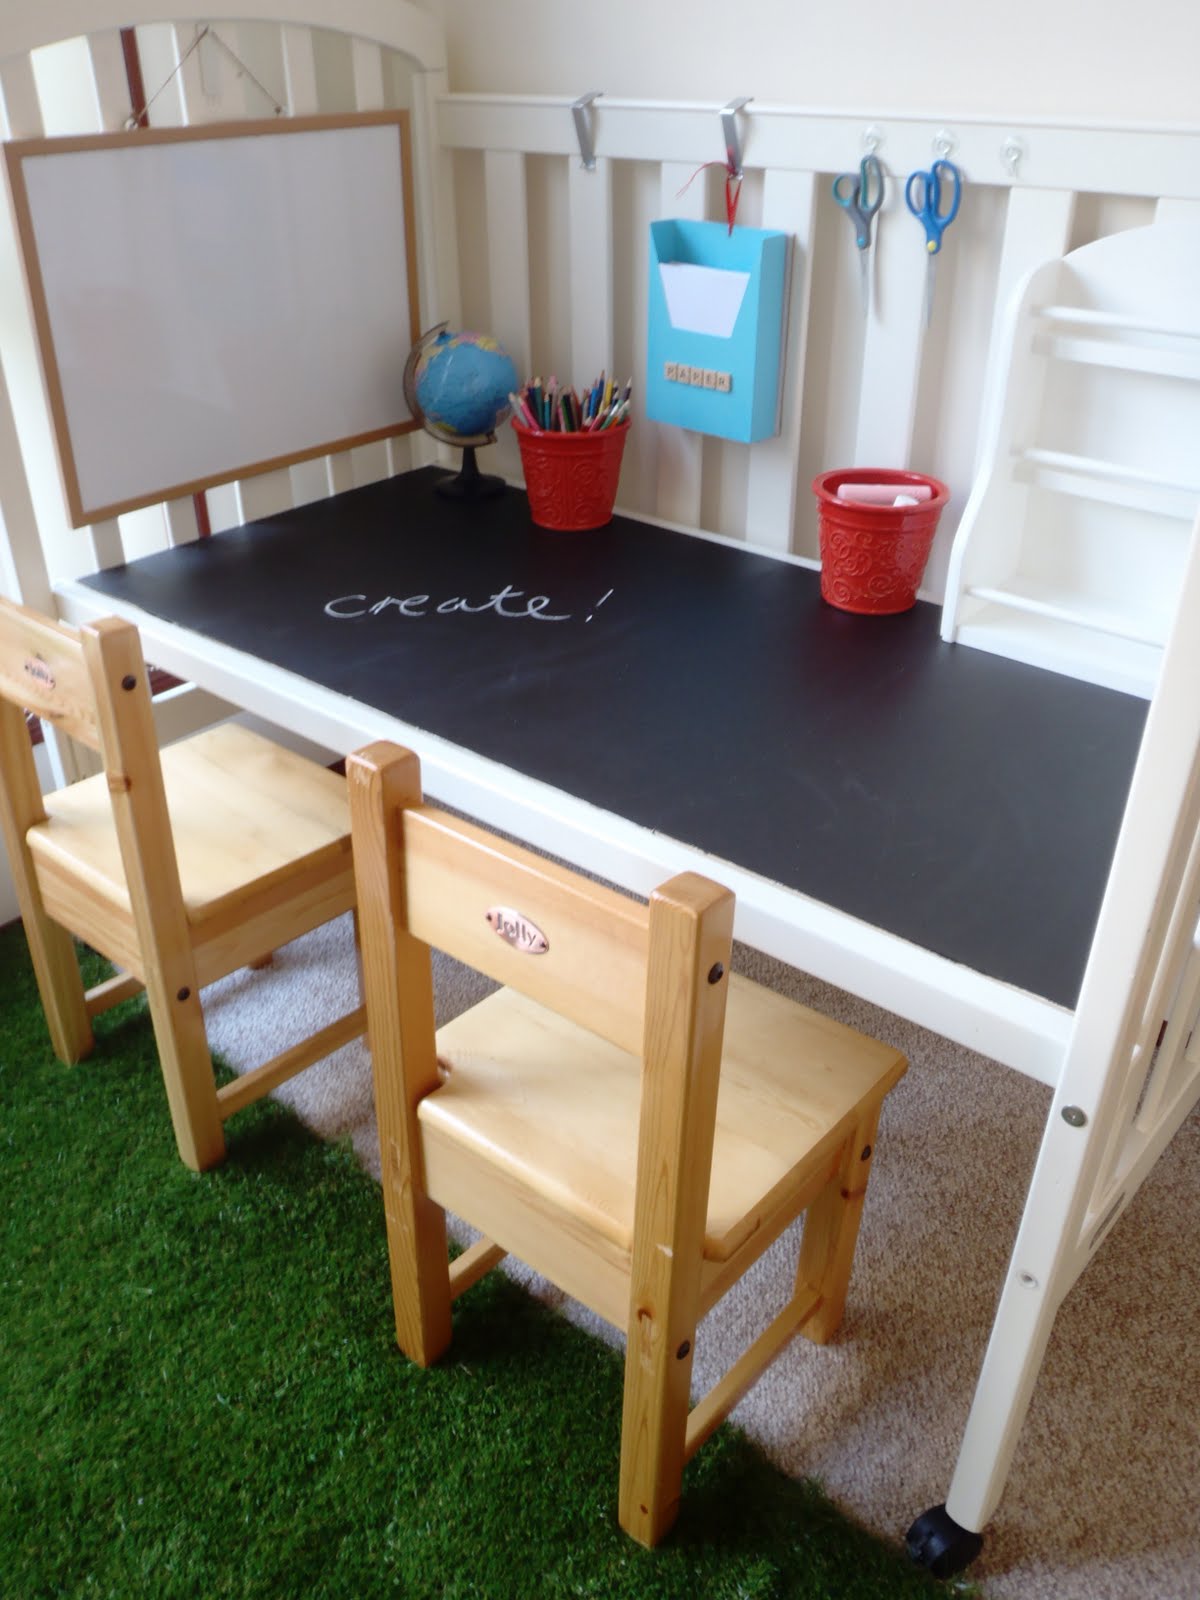 DIY chalkboard desk from an old cot